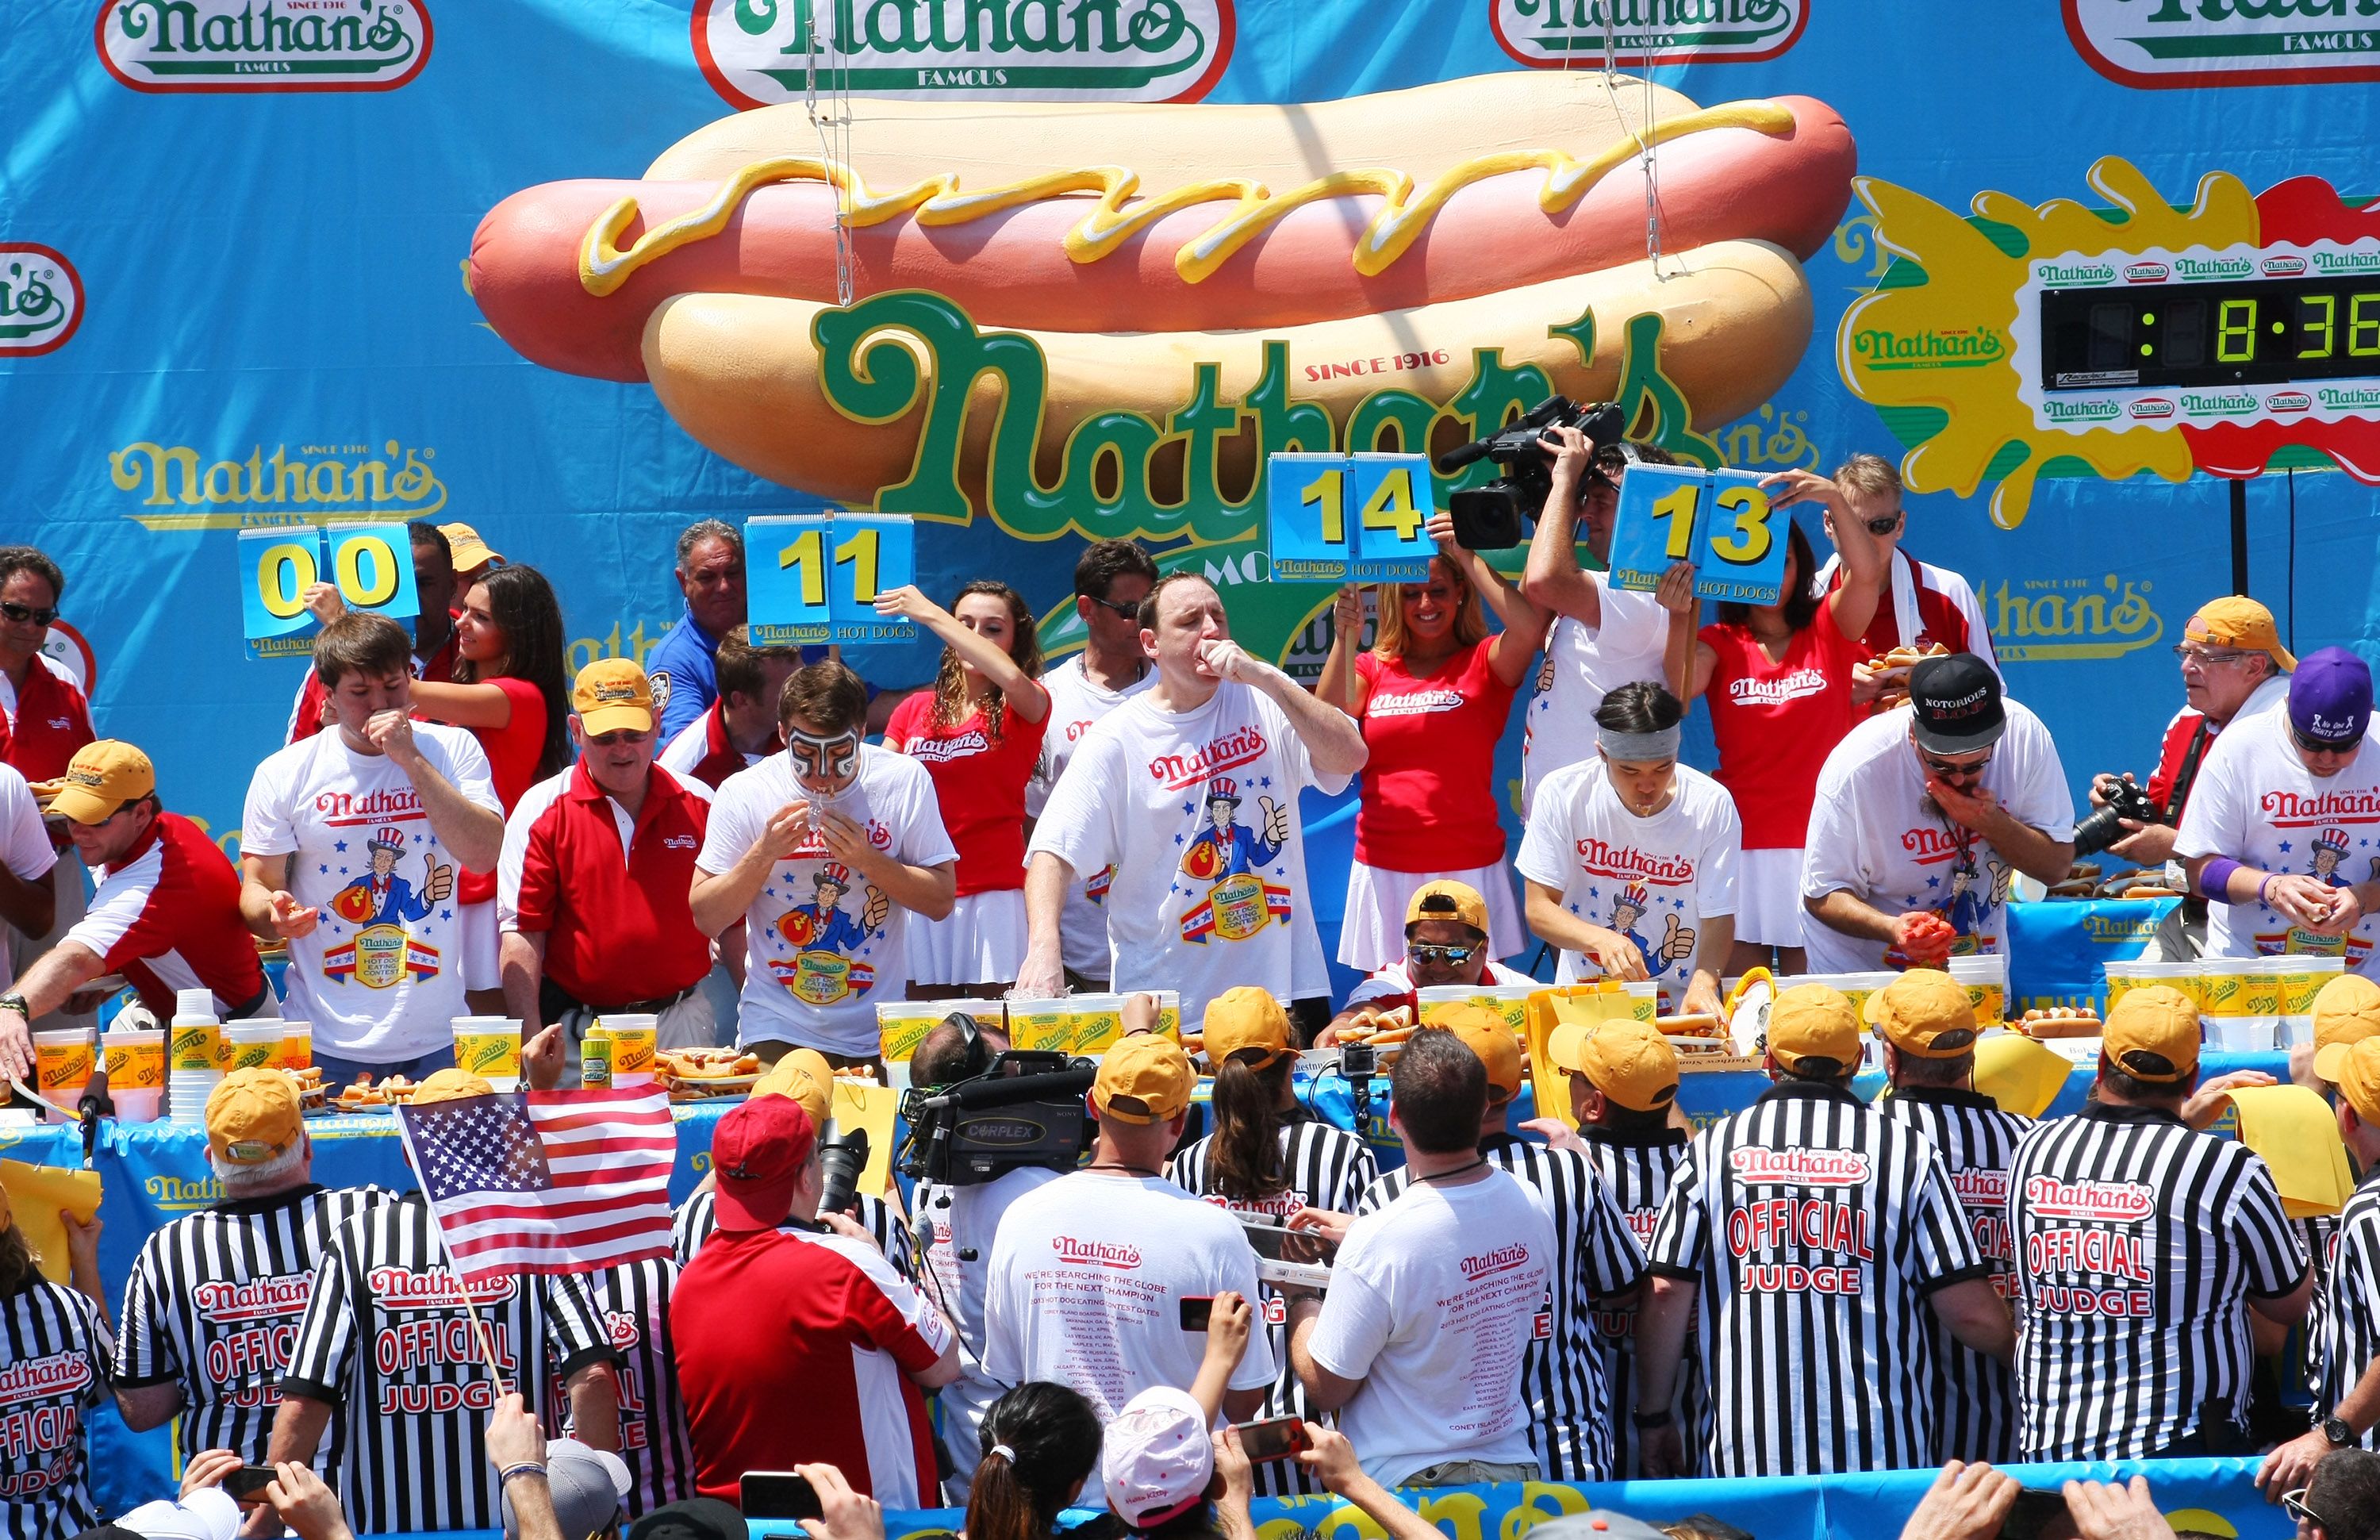 At Nathan's hot dog eating contest, there is only one star